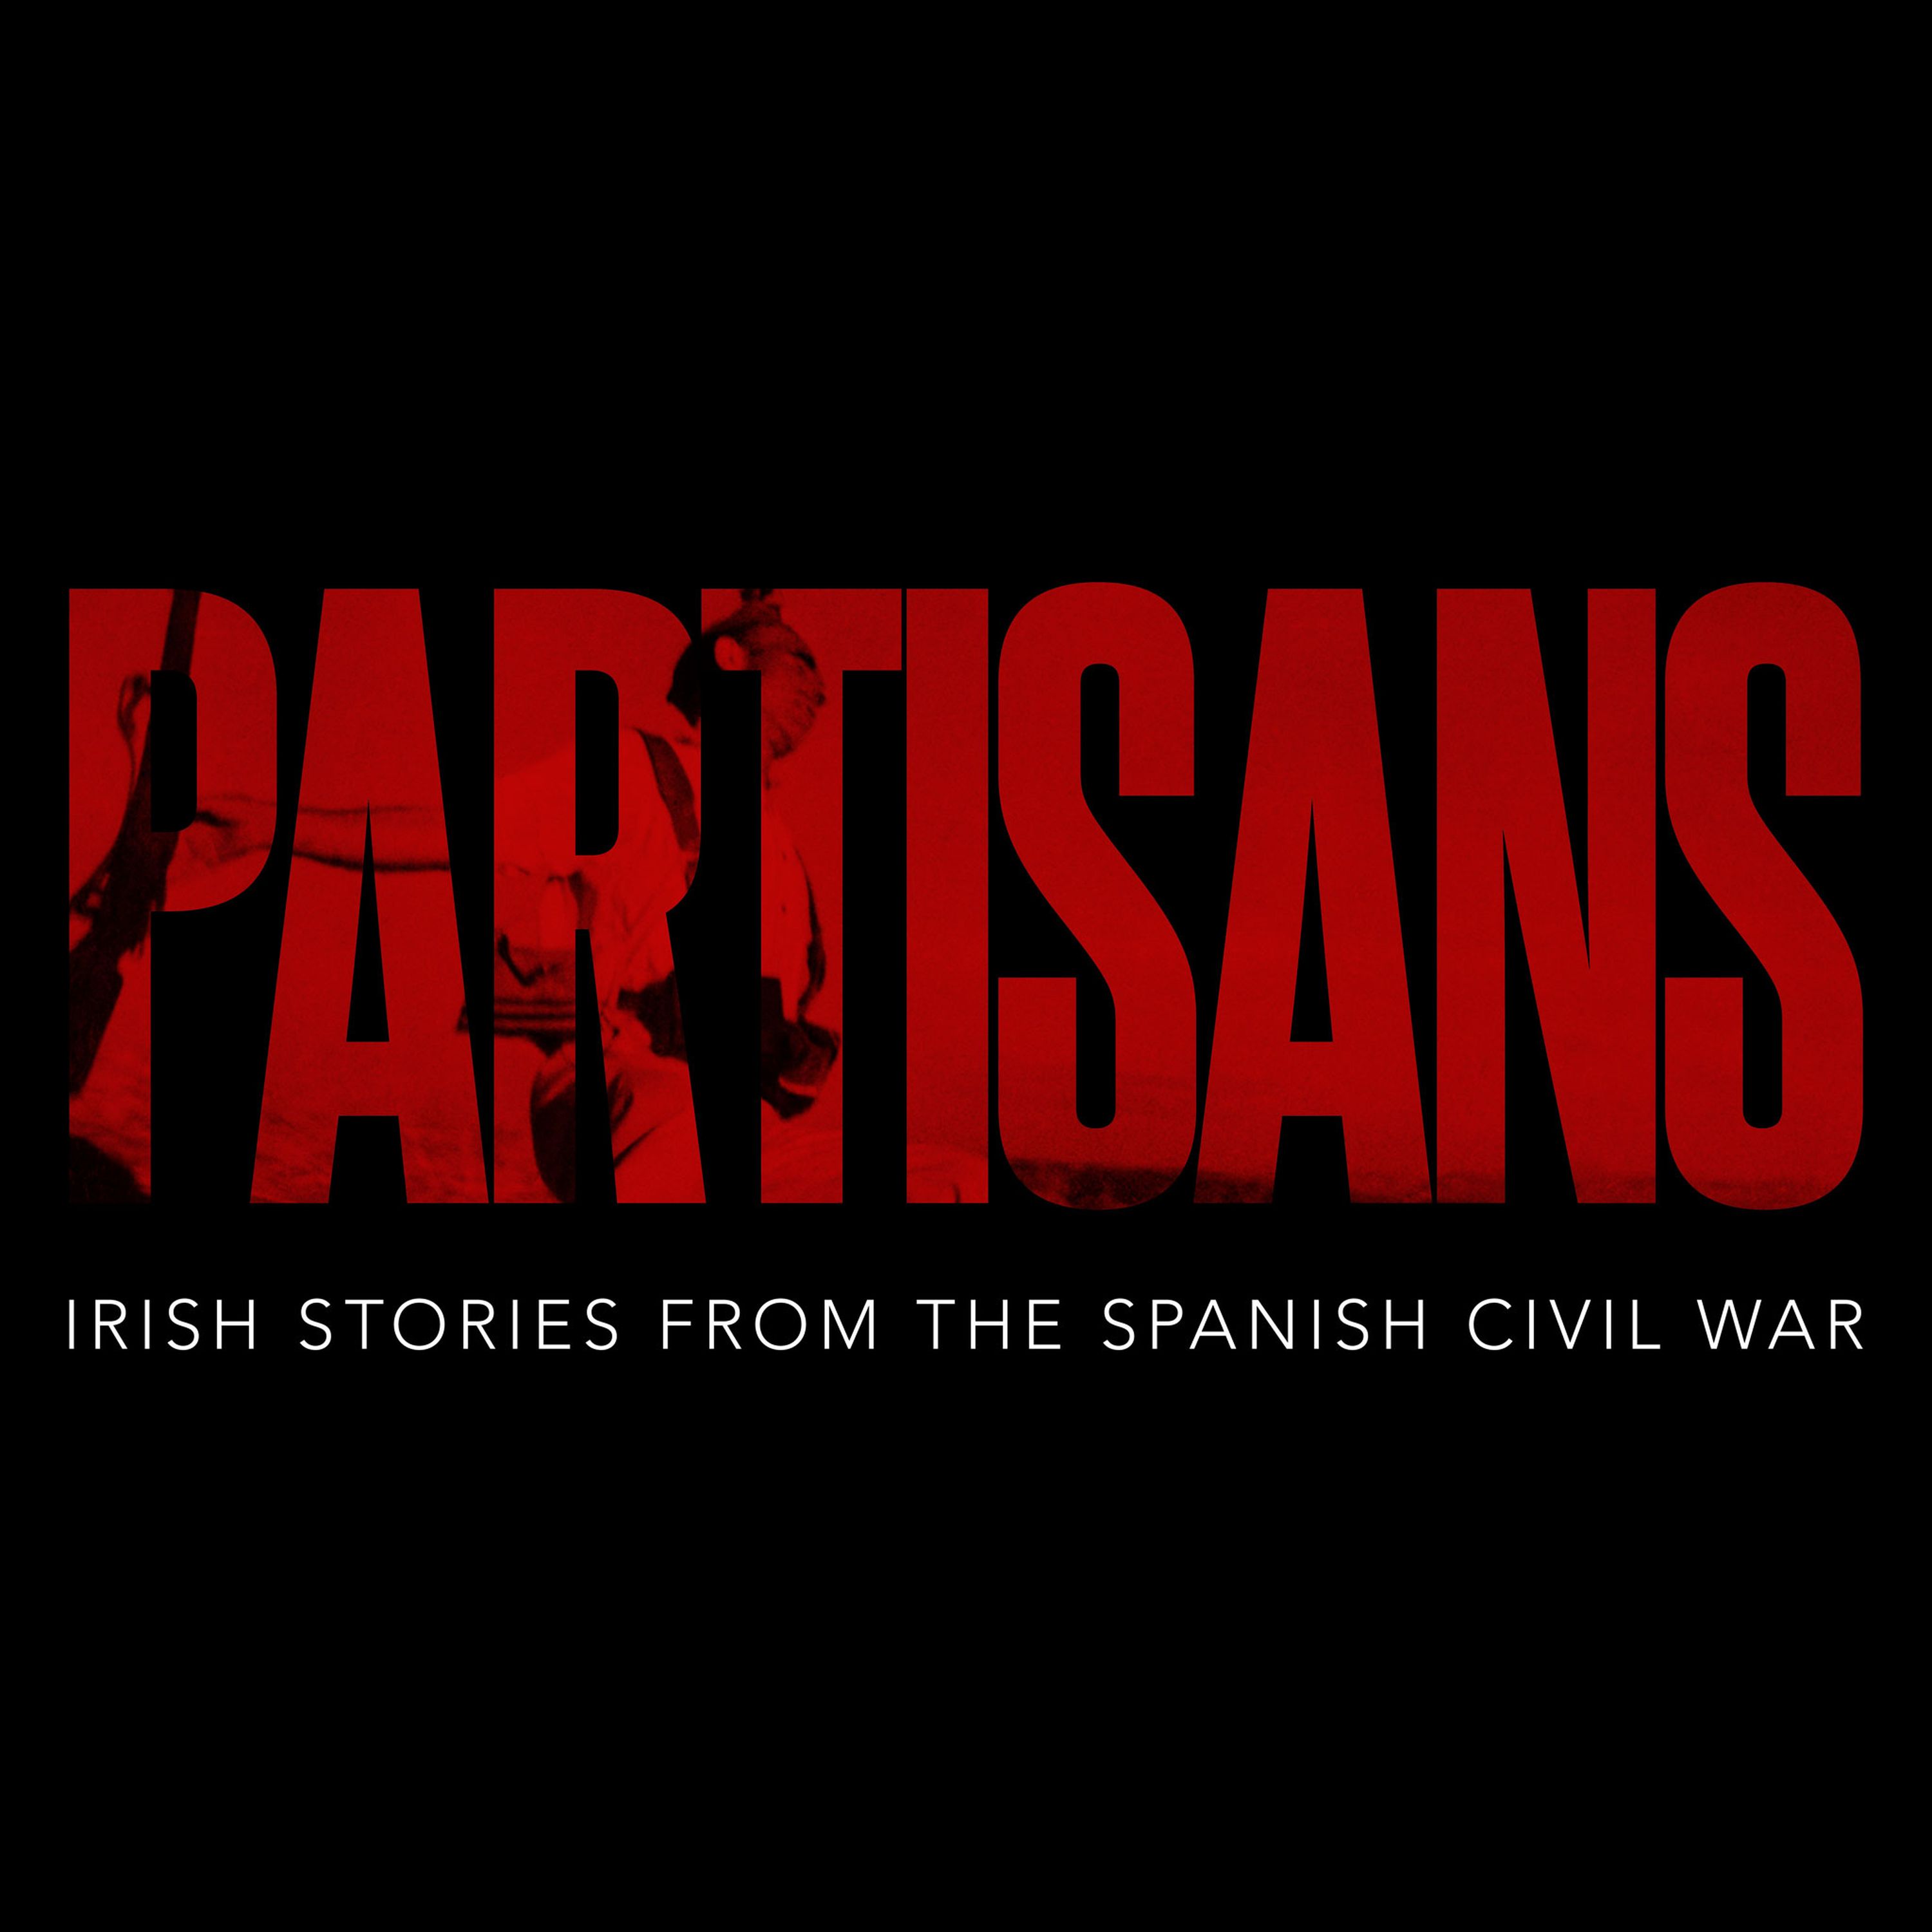 The Legacy of the Spanish Civil War (Partisans X)